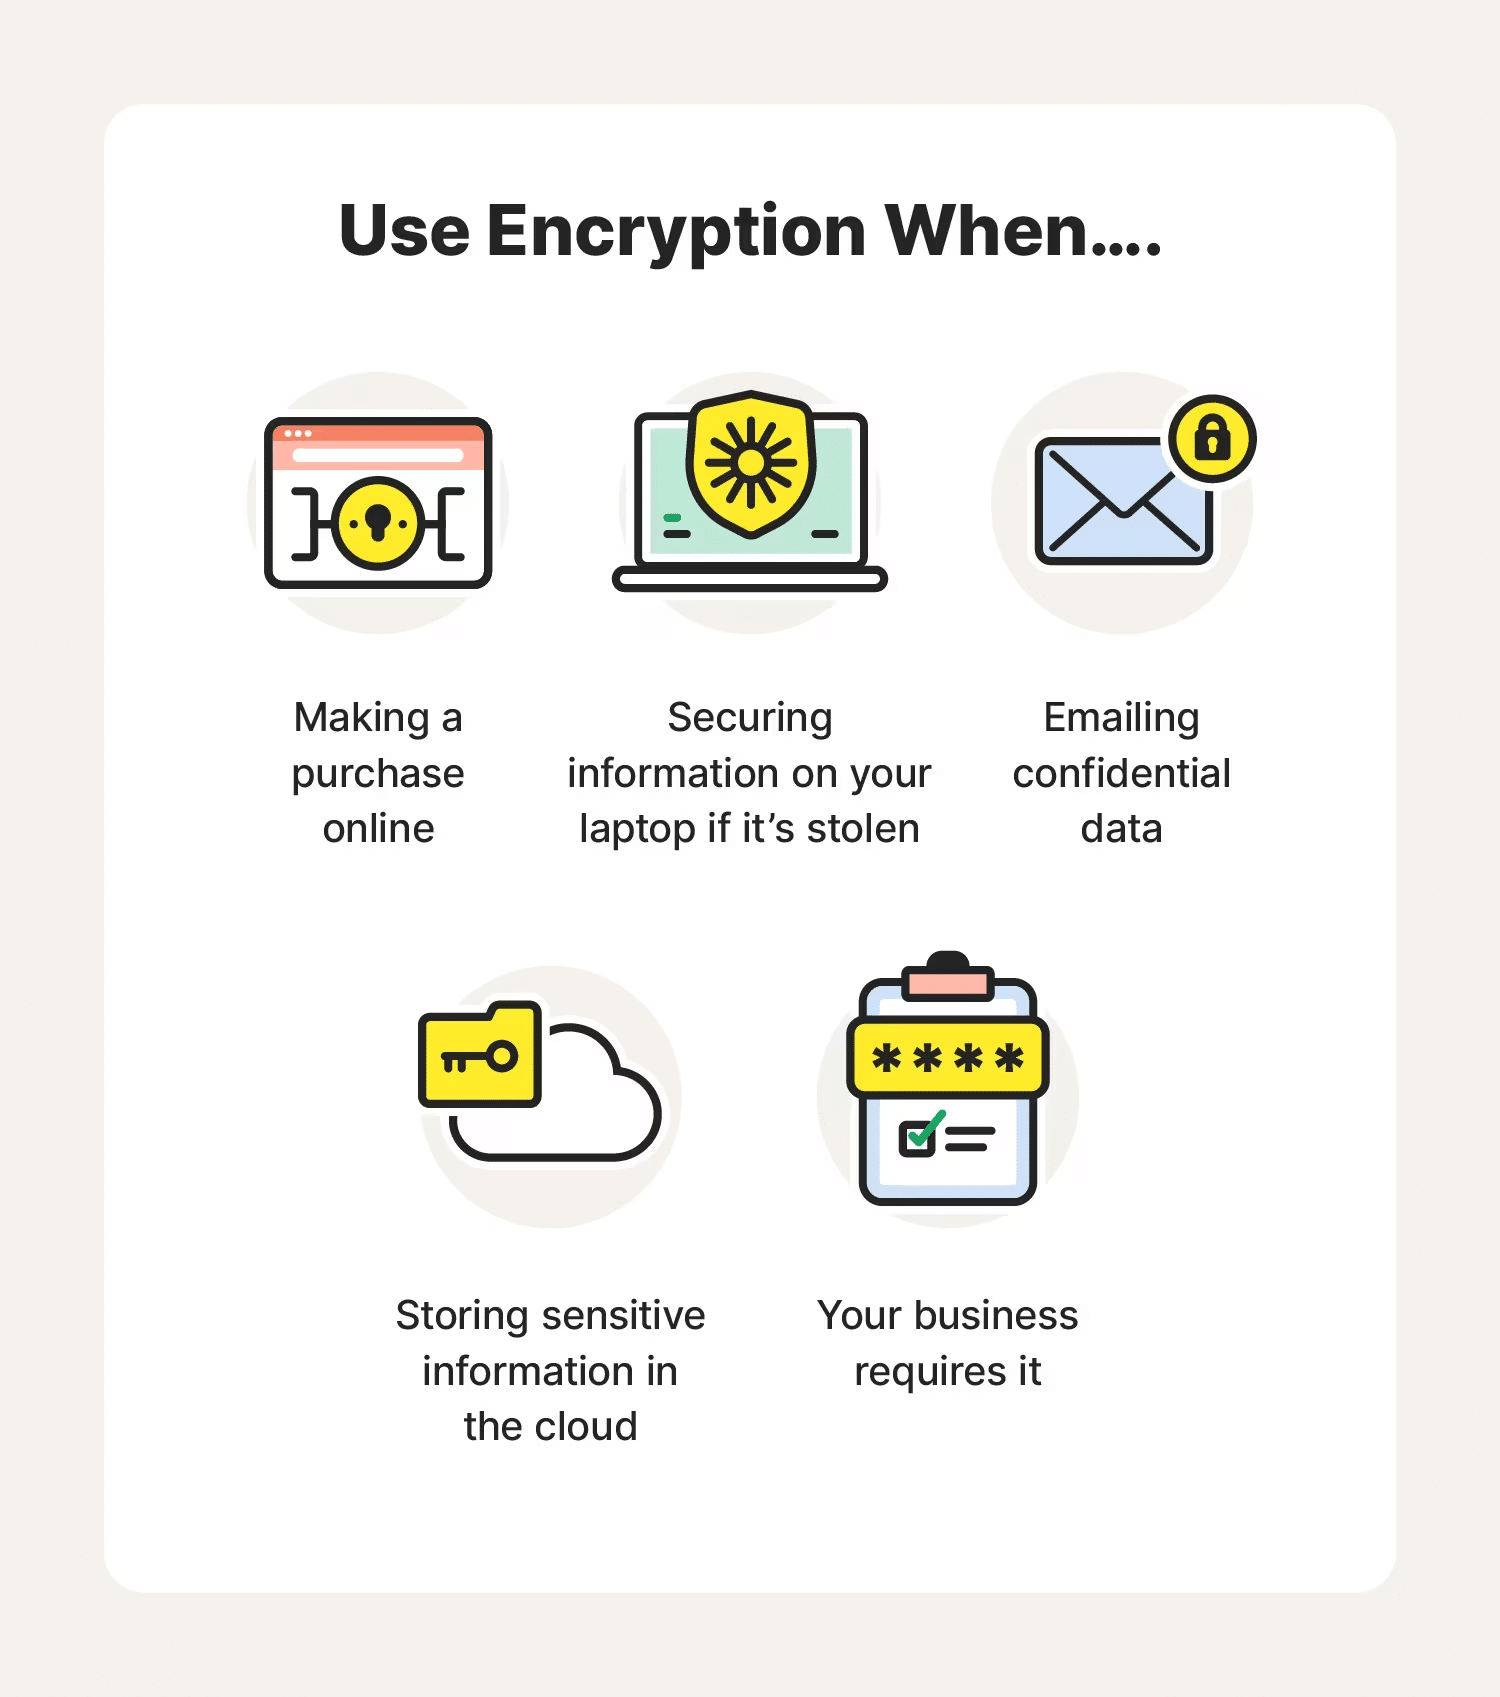 Advantages and Disadvantages of Encryption